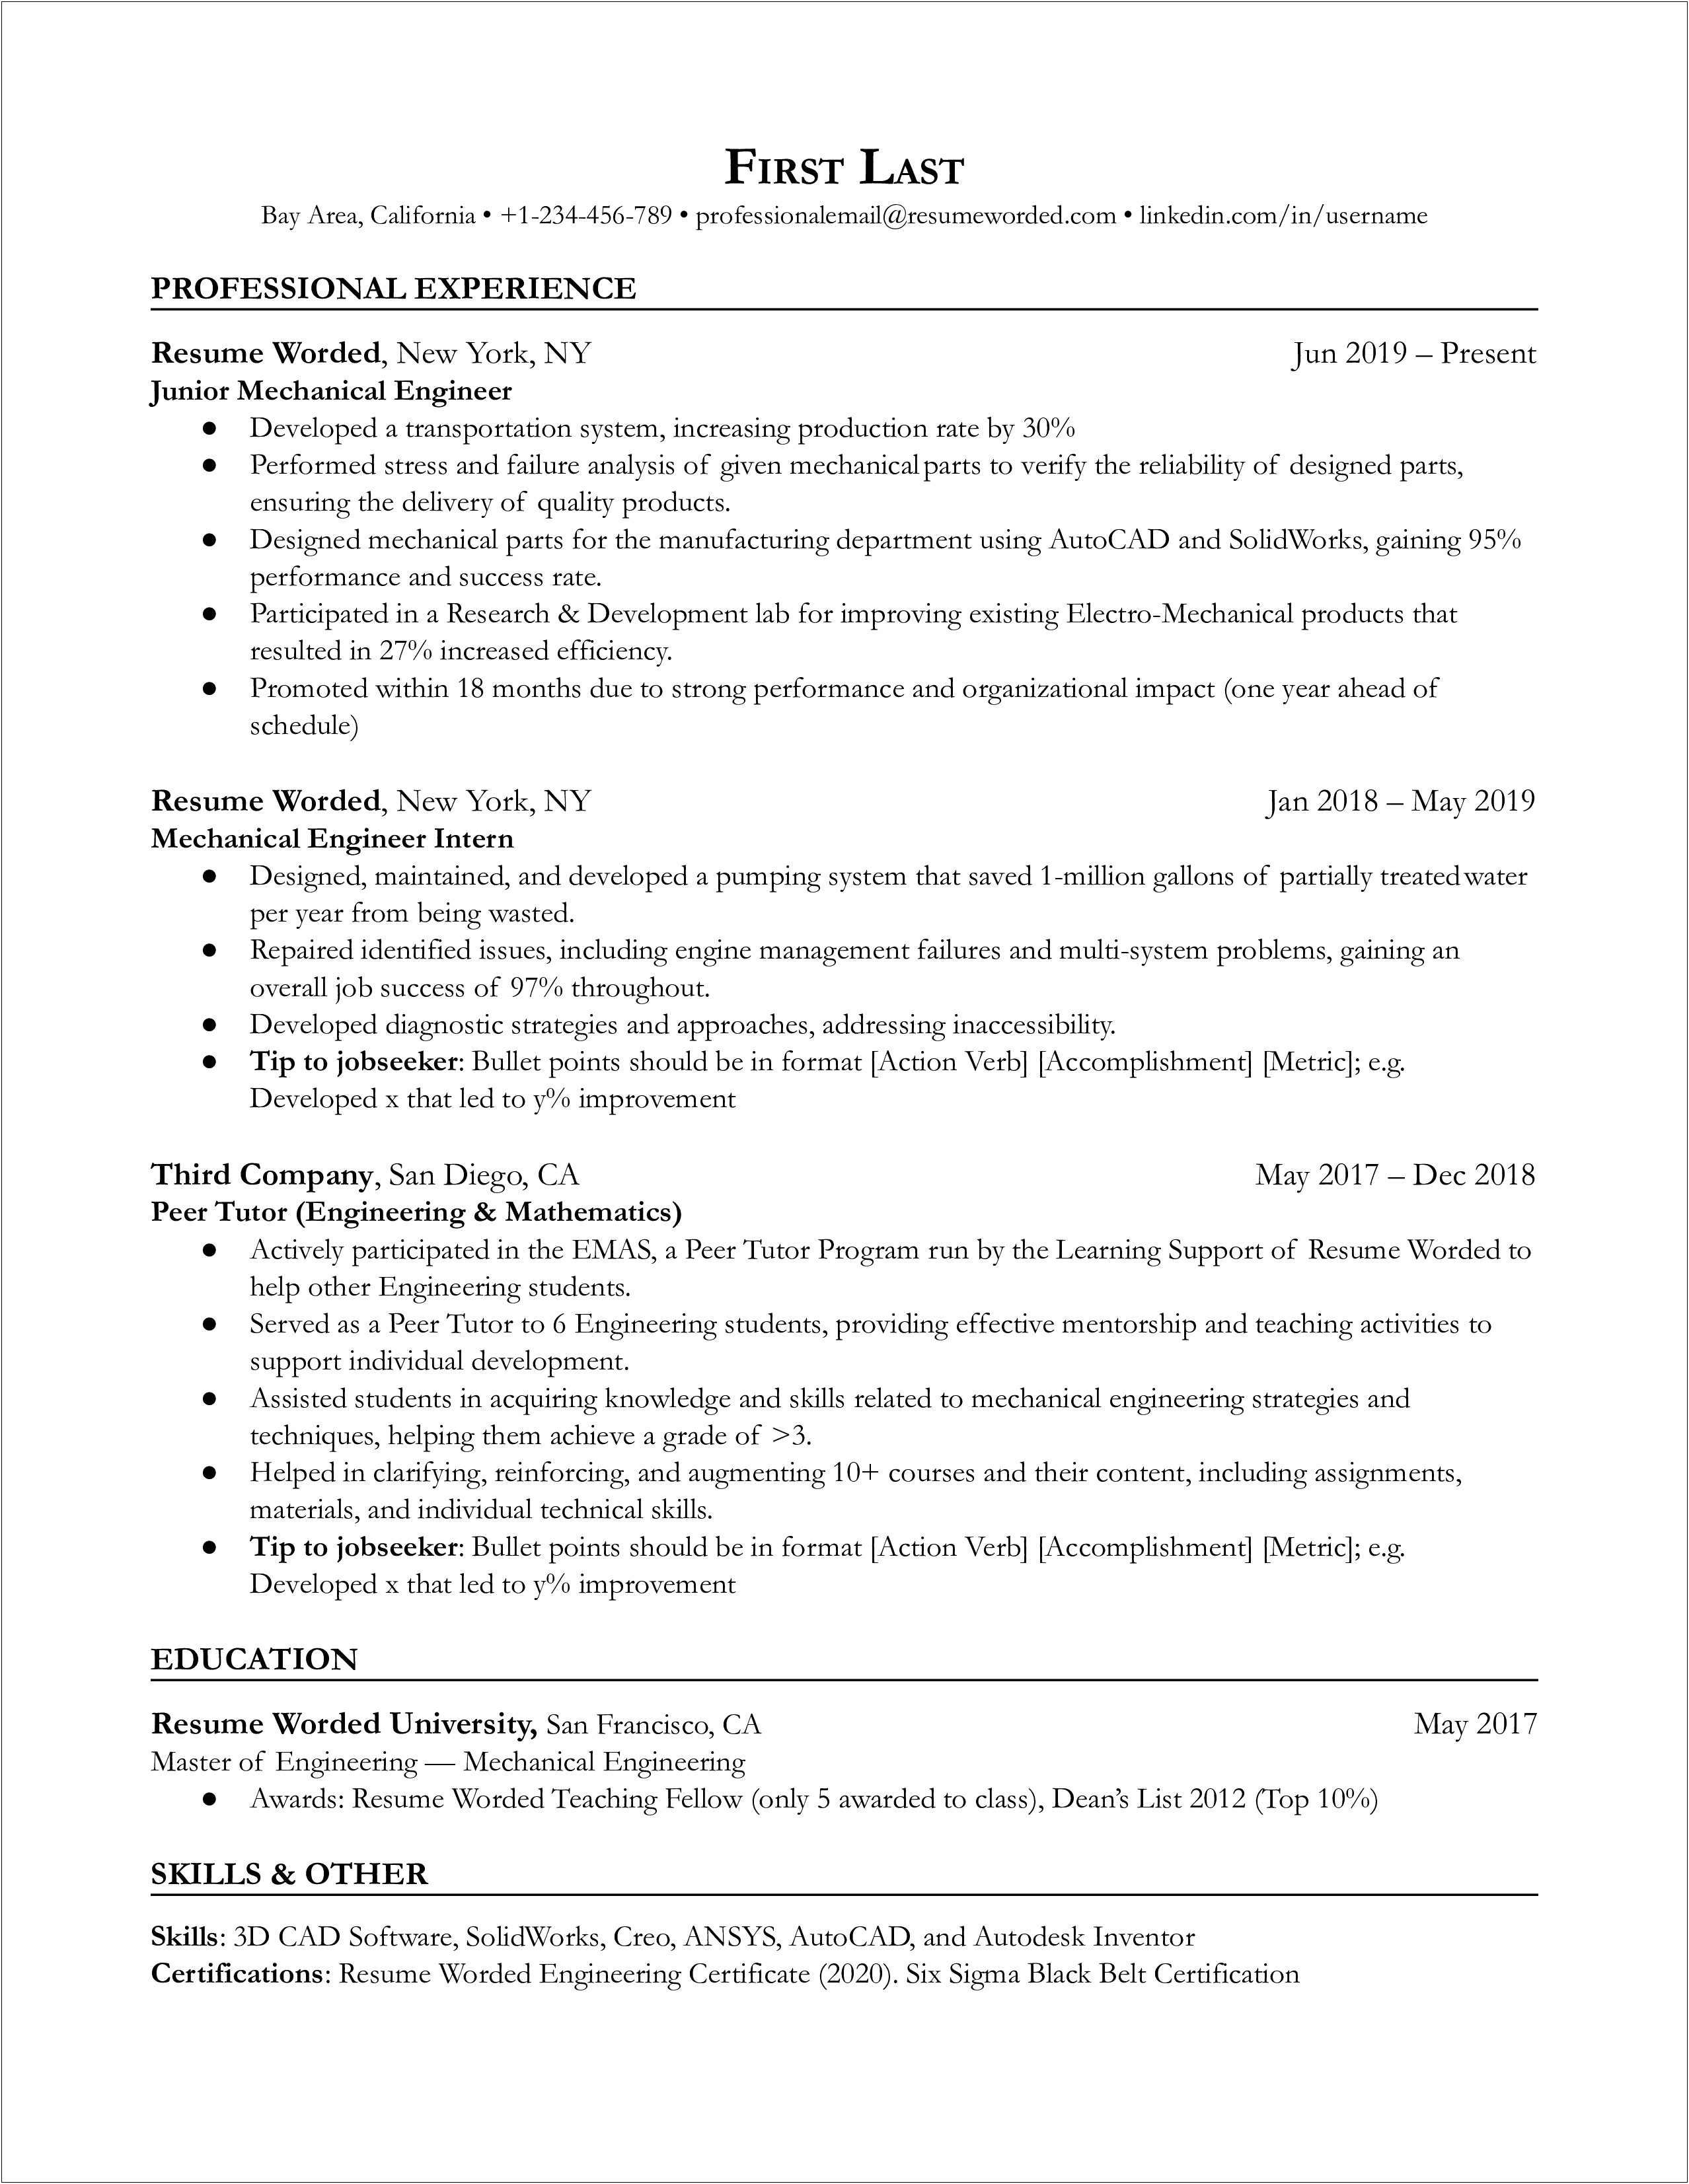 Red Hat Certified Resumes Sample Resume For Experienced